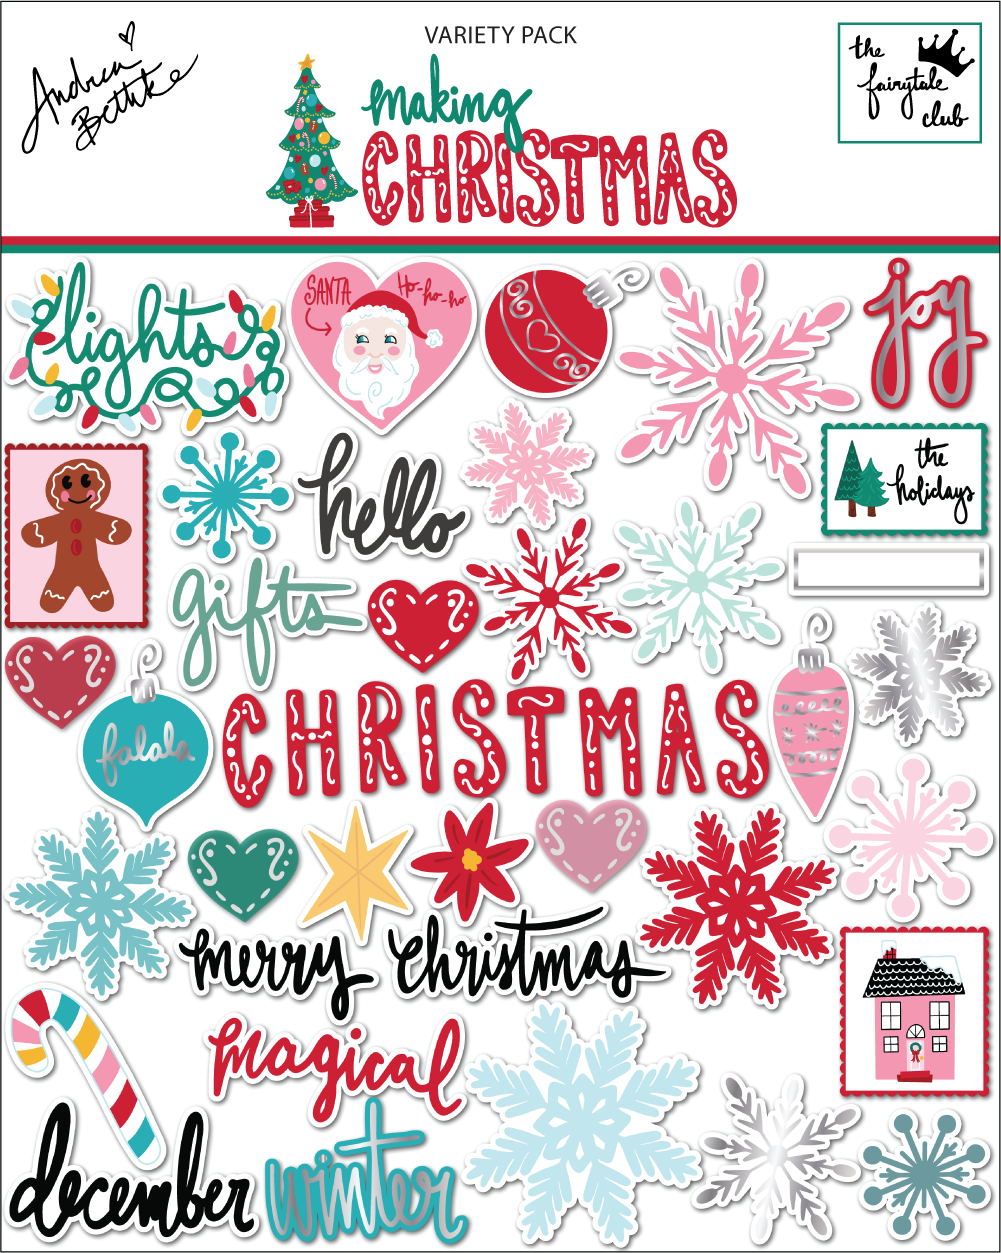 Making Christmas - Variety Pack with packaging-06.png